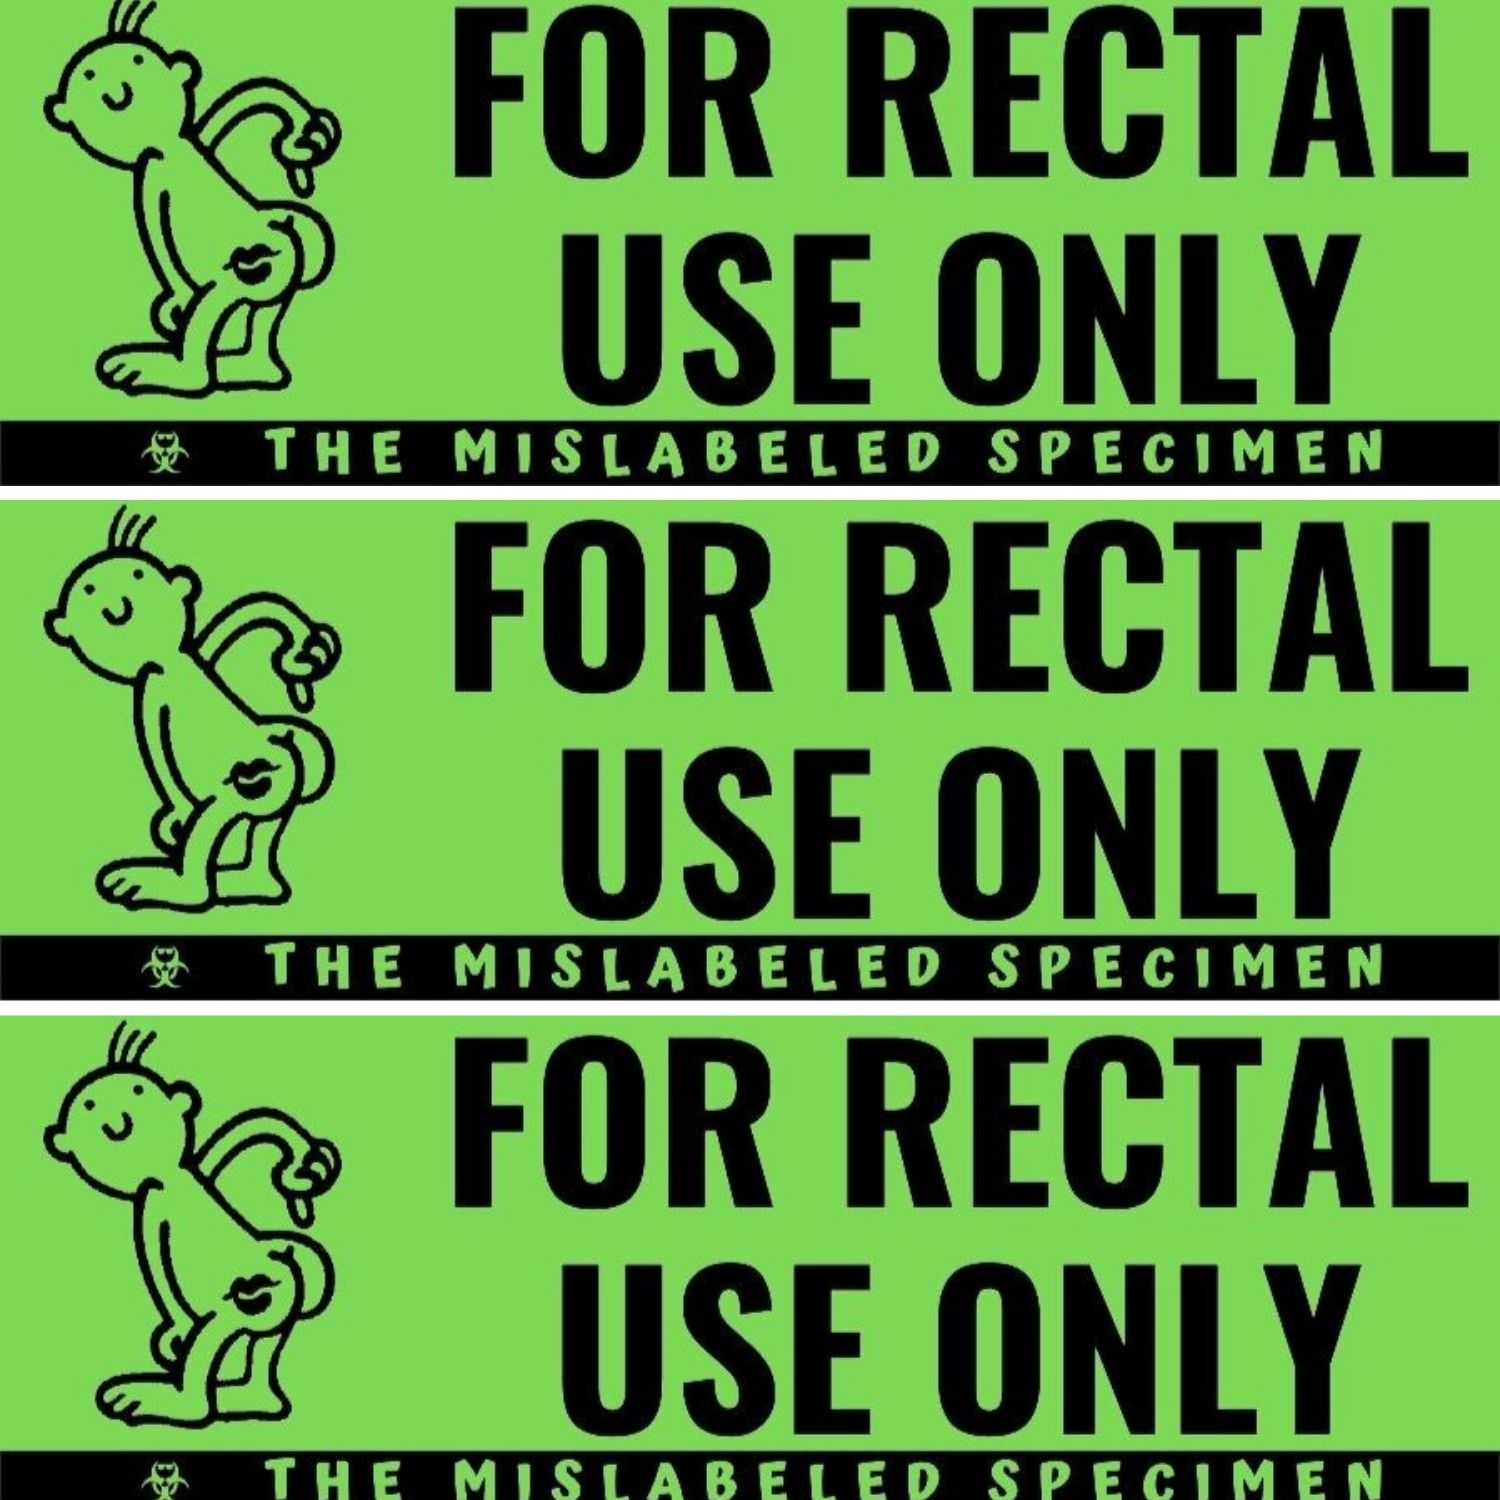 For Rectal Use Only